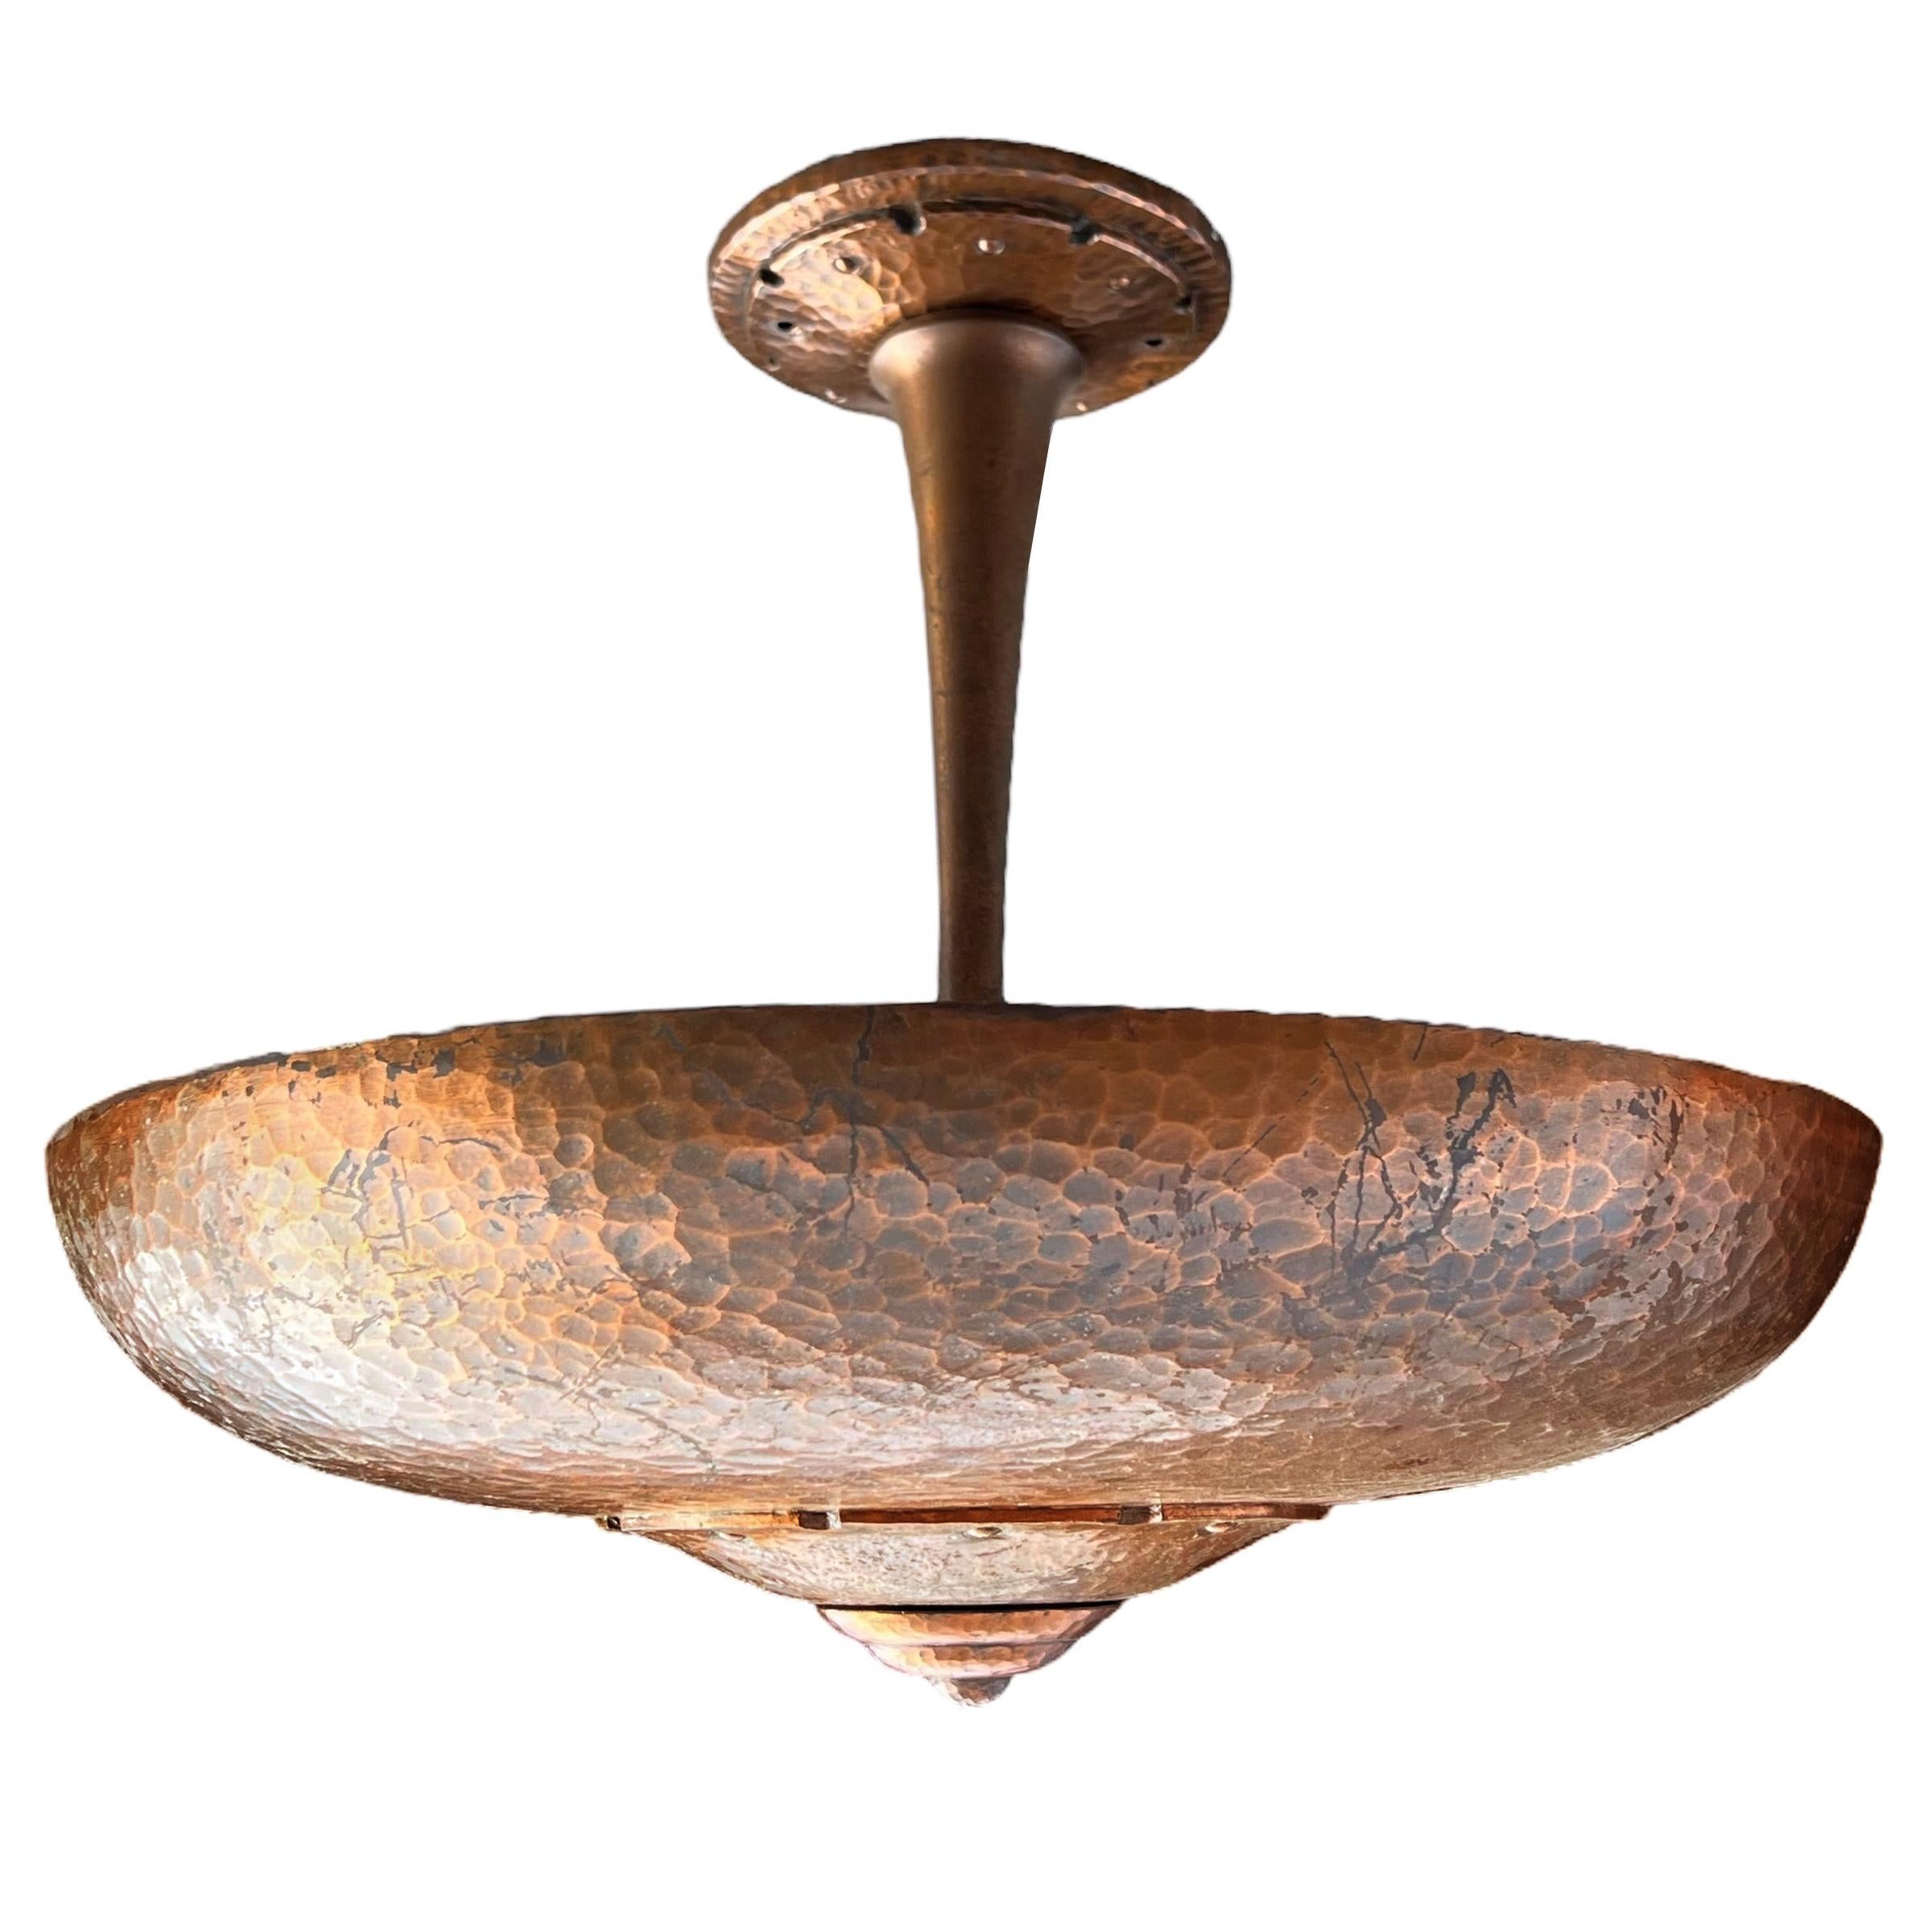 Early 20th Century American Art Deco Hammered Copper Light Fixture For Sale 1